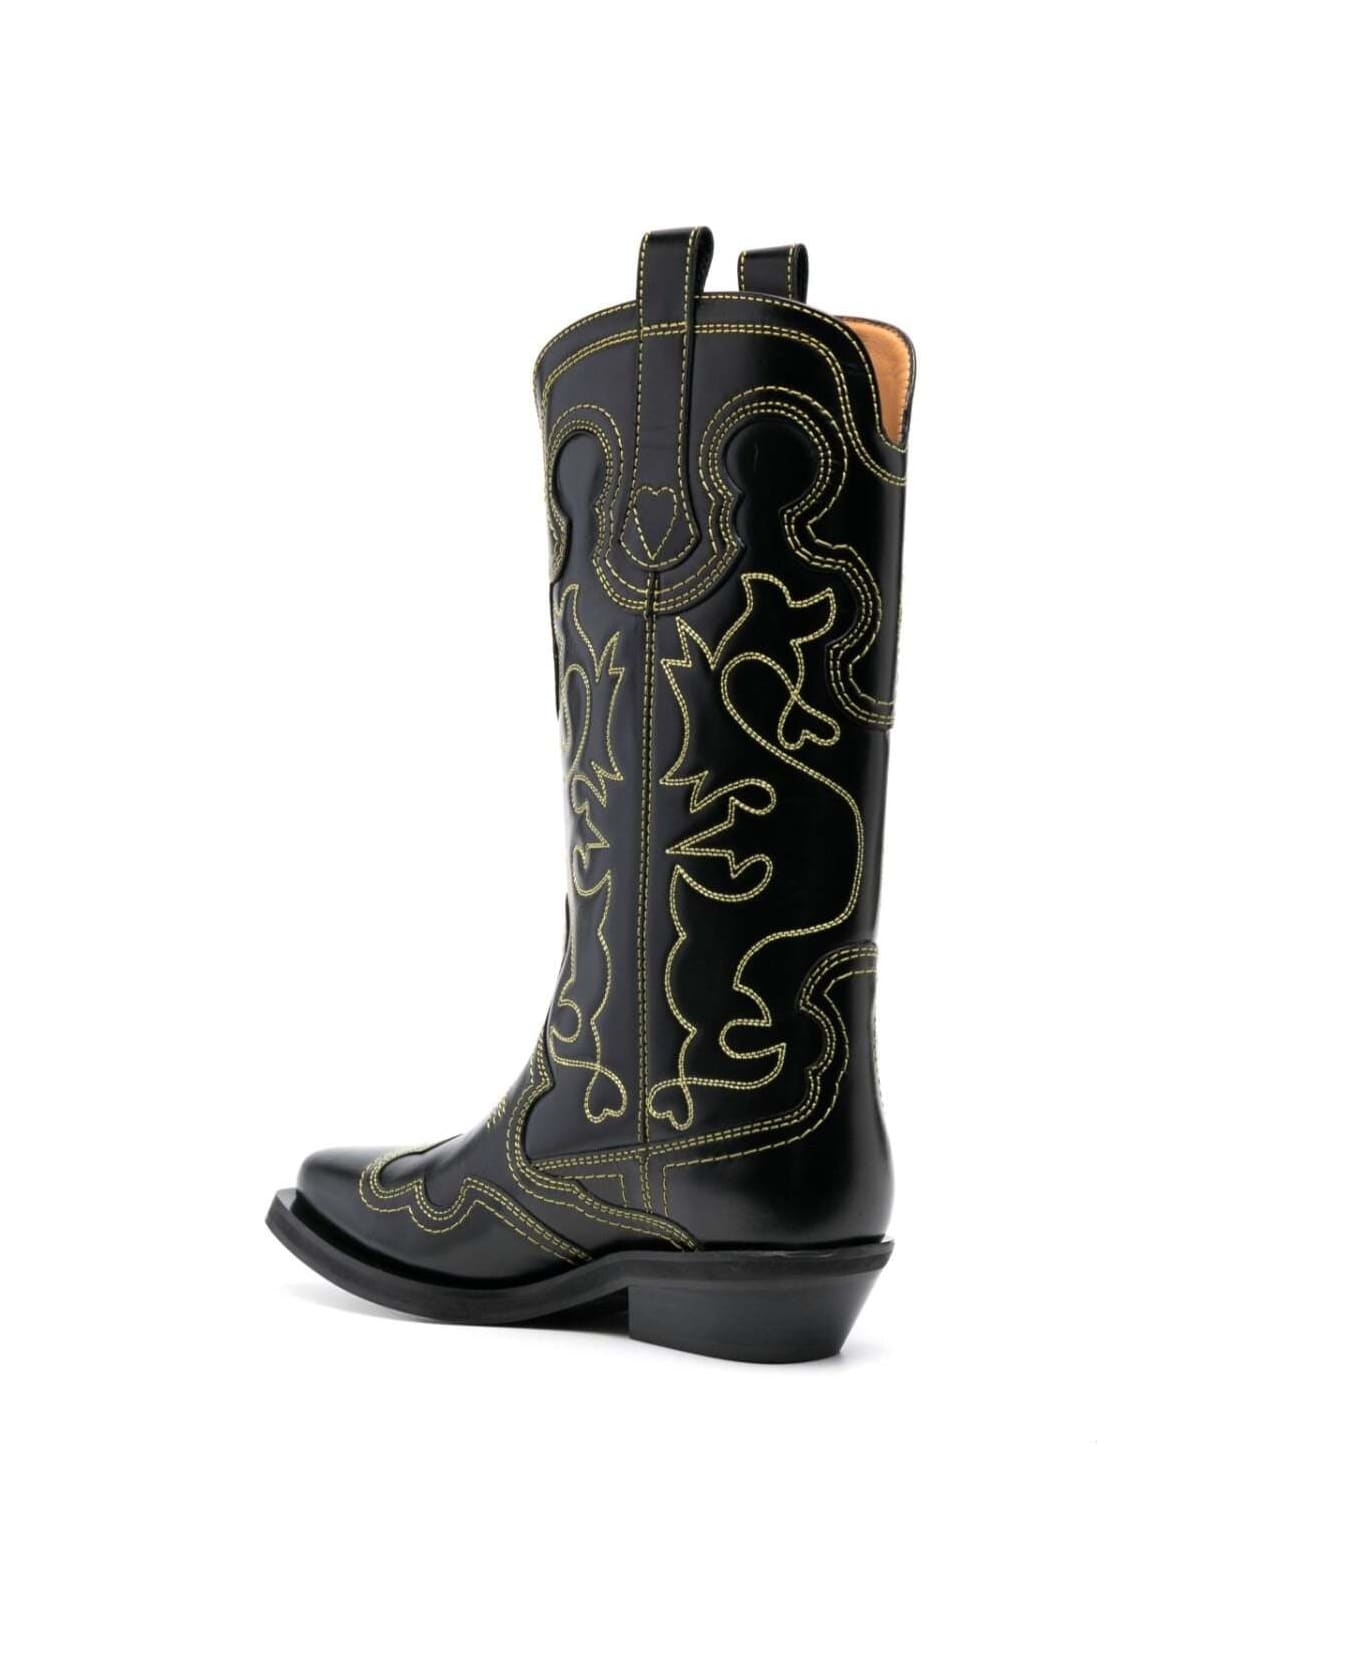 Ganni Black 'cowboy' Boots With Contrasting Embroidered Stitching In Leather Woman - Black ブーツ